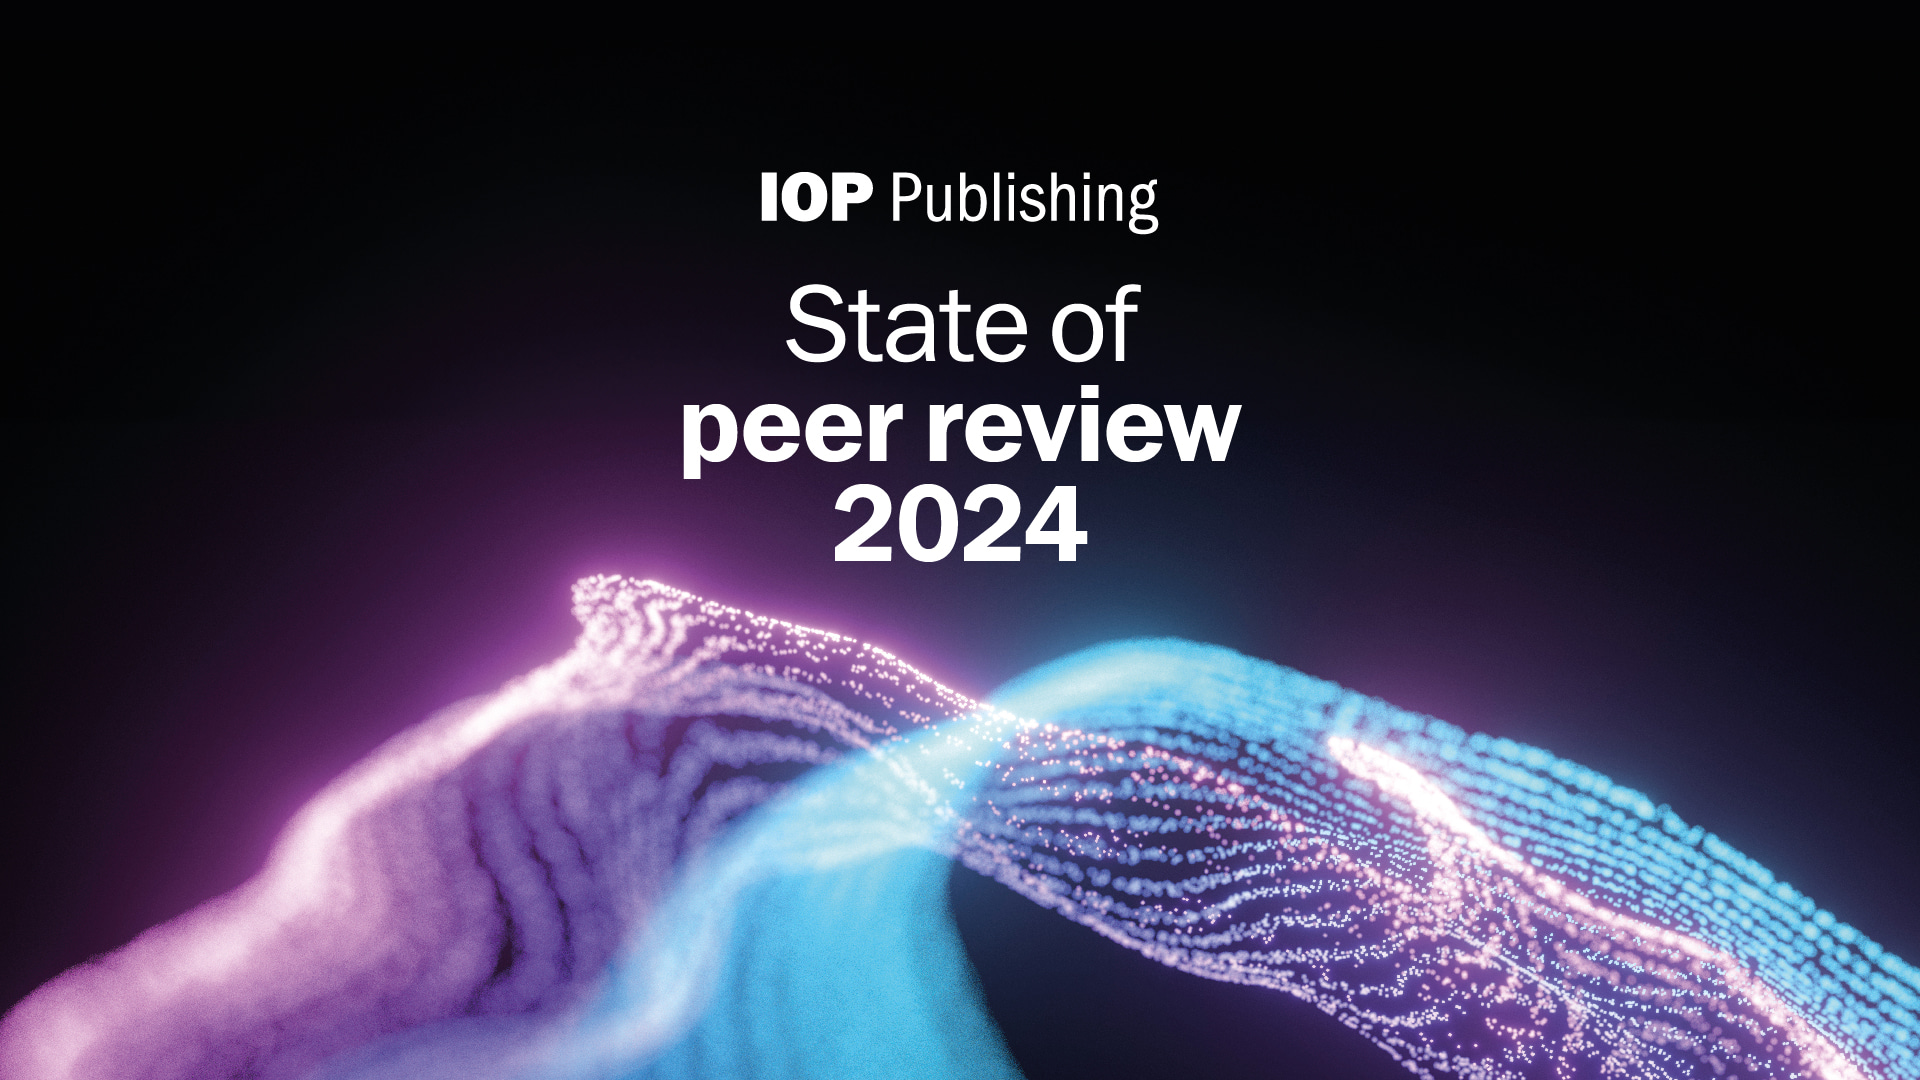 State of Peer Review 2024 report